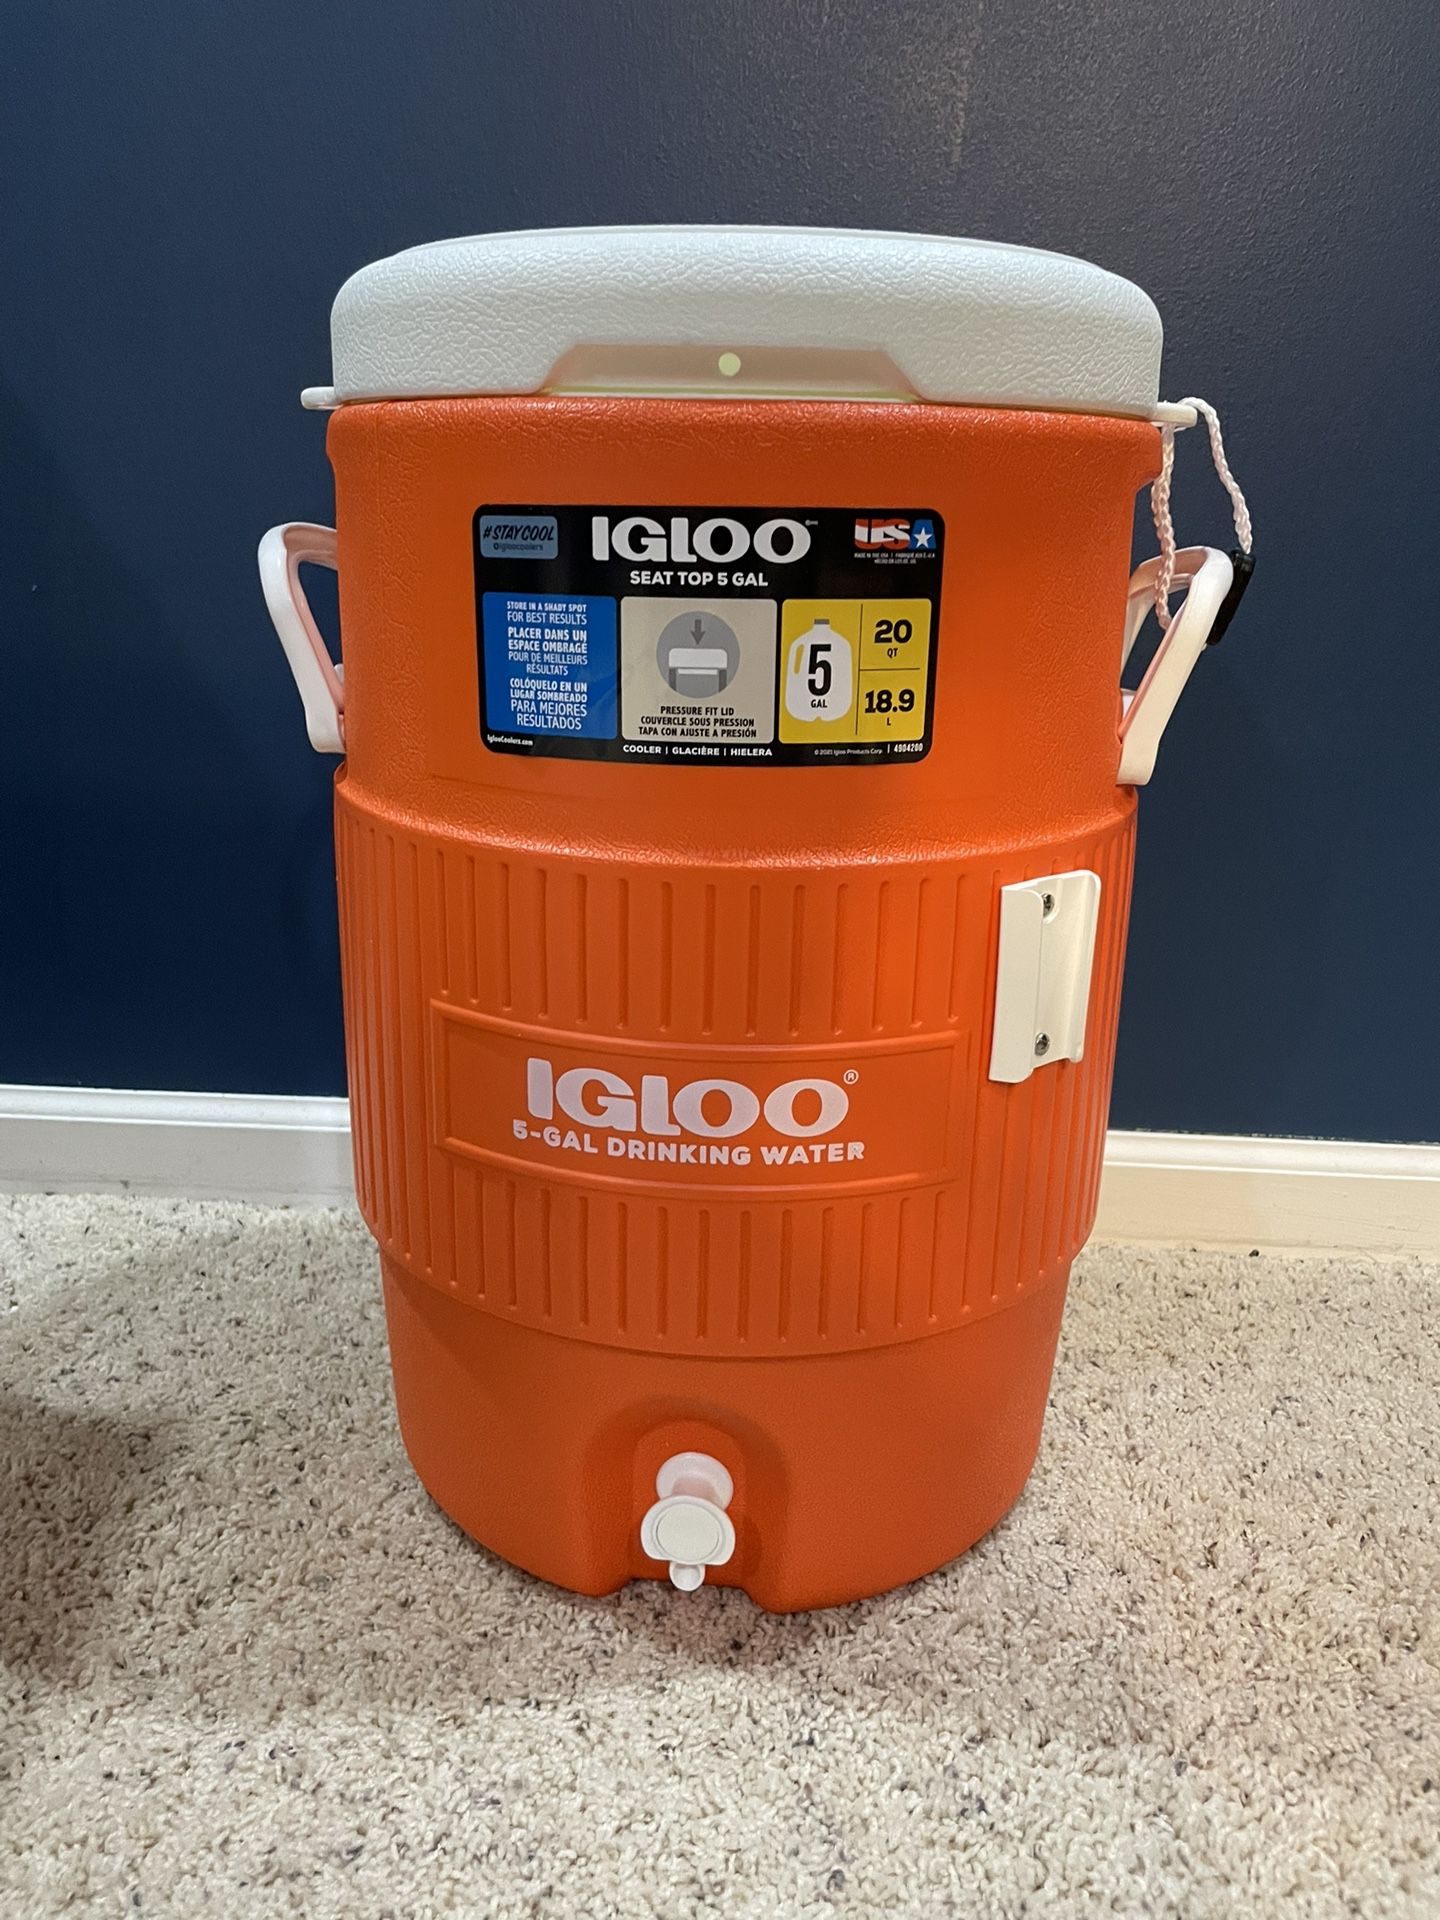 Brand New Igloo 5 Gallon Seat Top Water Cooler Local Pickup Only